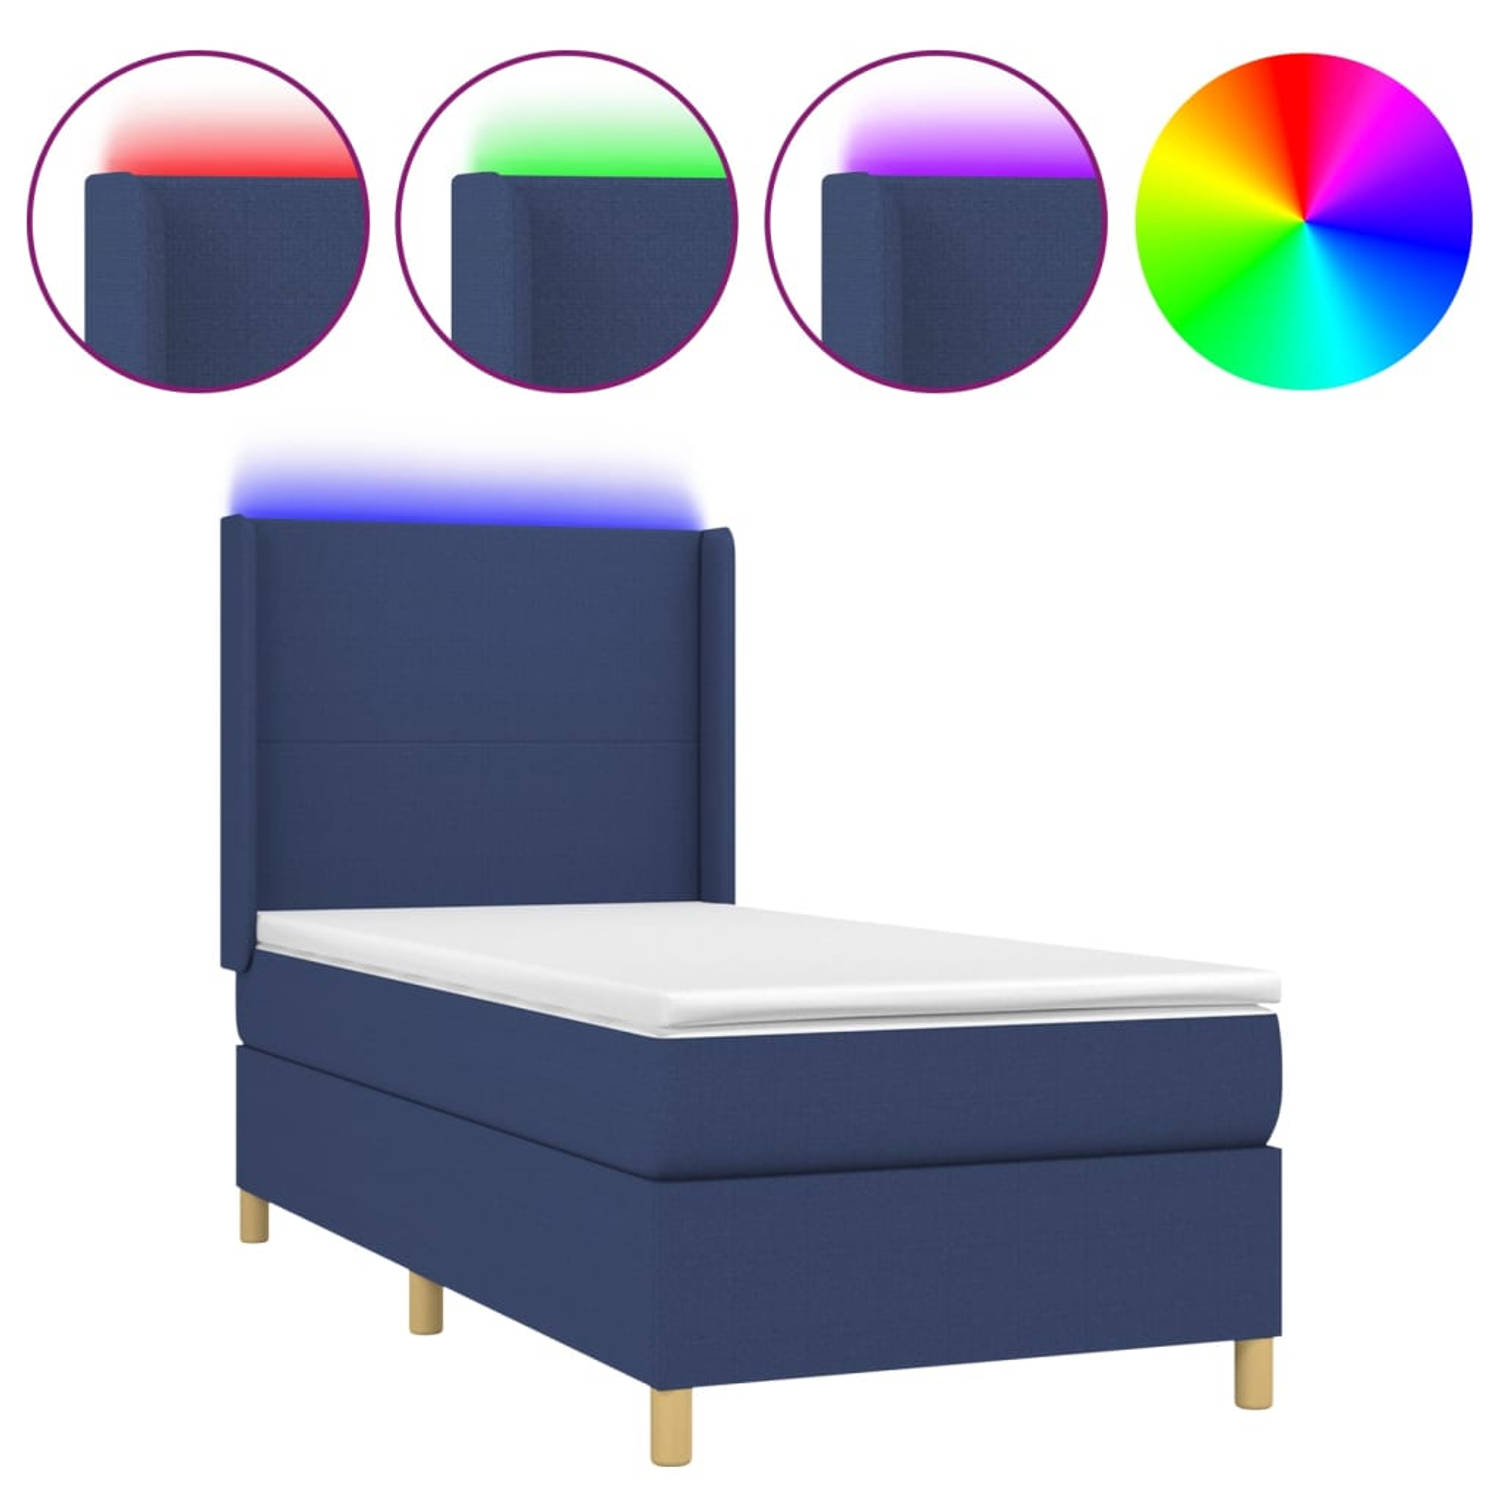 The Living Store Boxspring Bed - Blauw - 193x93x118/128 cm - Inclusief Matras en LED